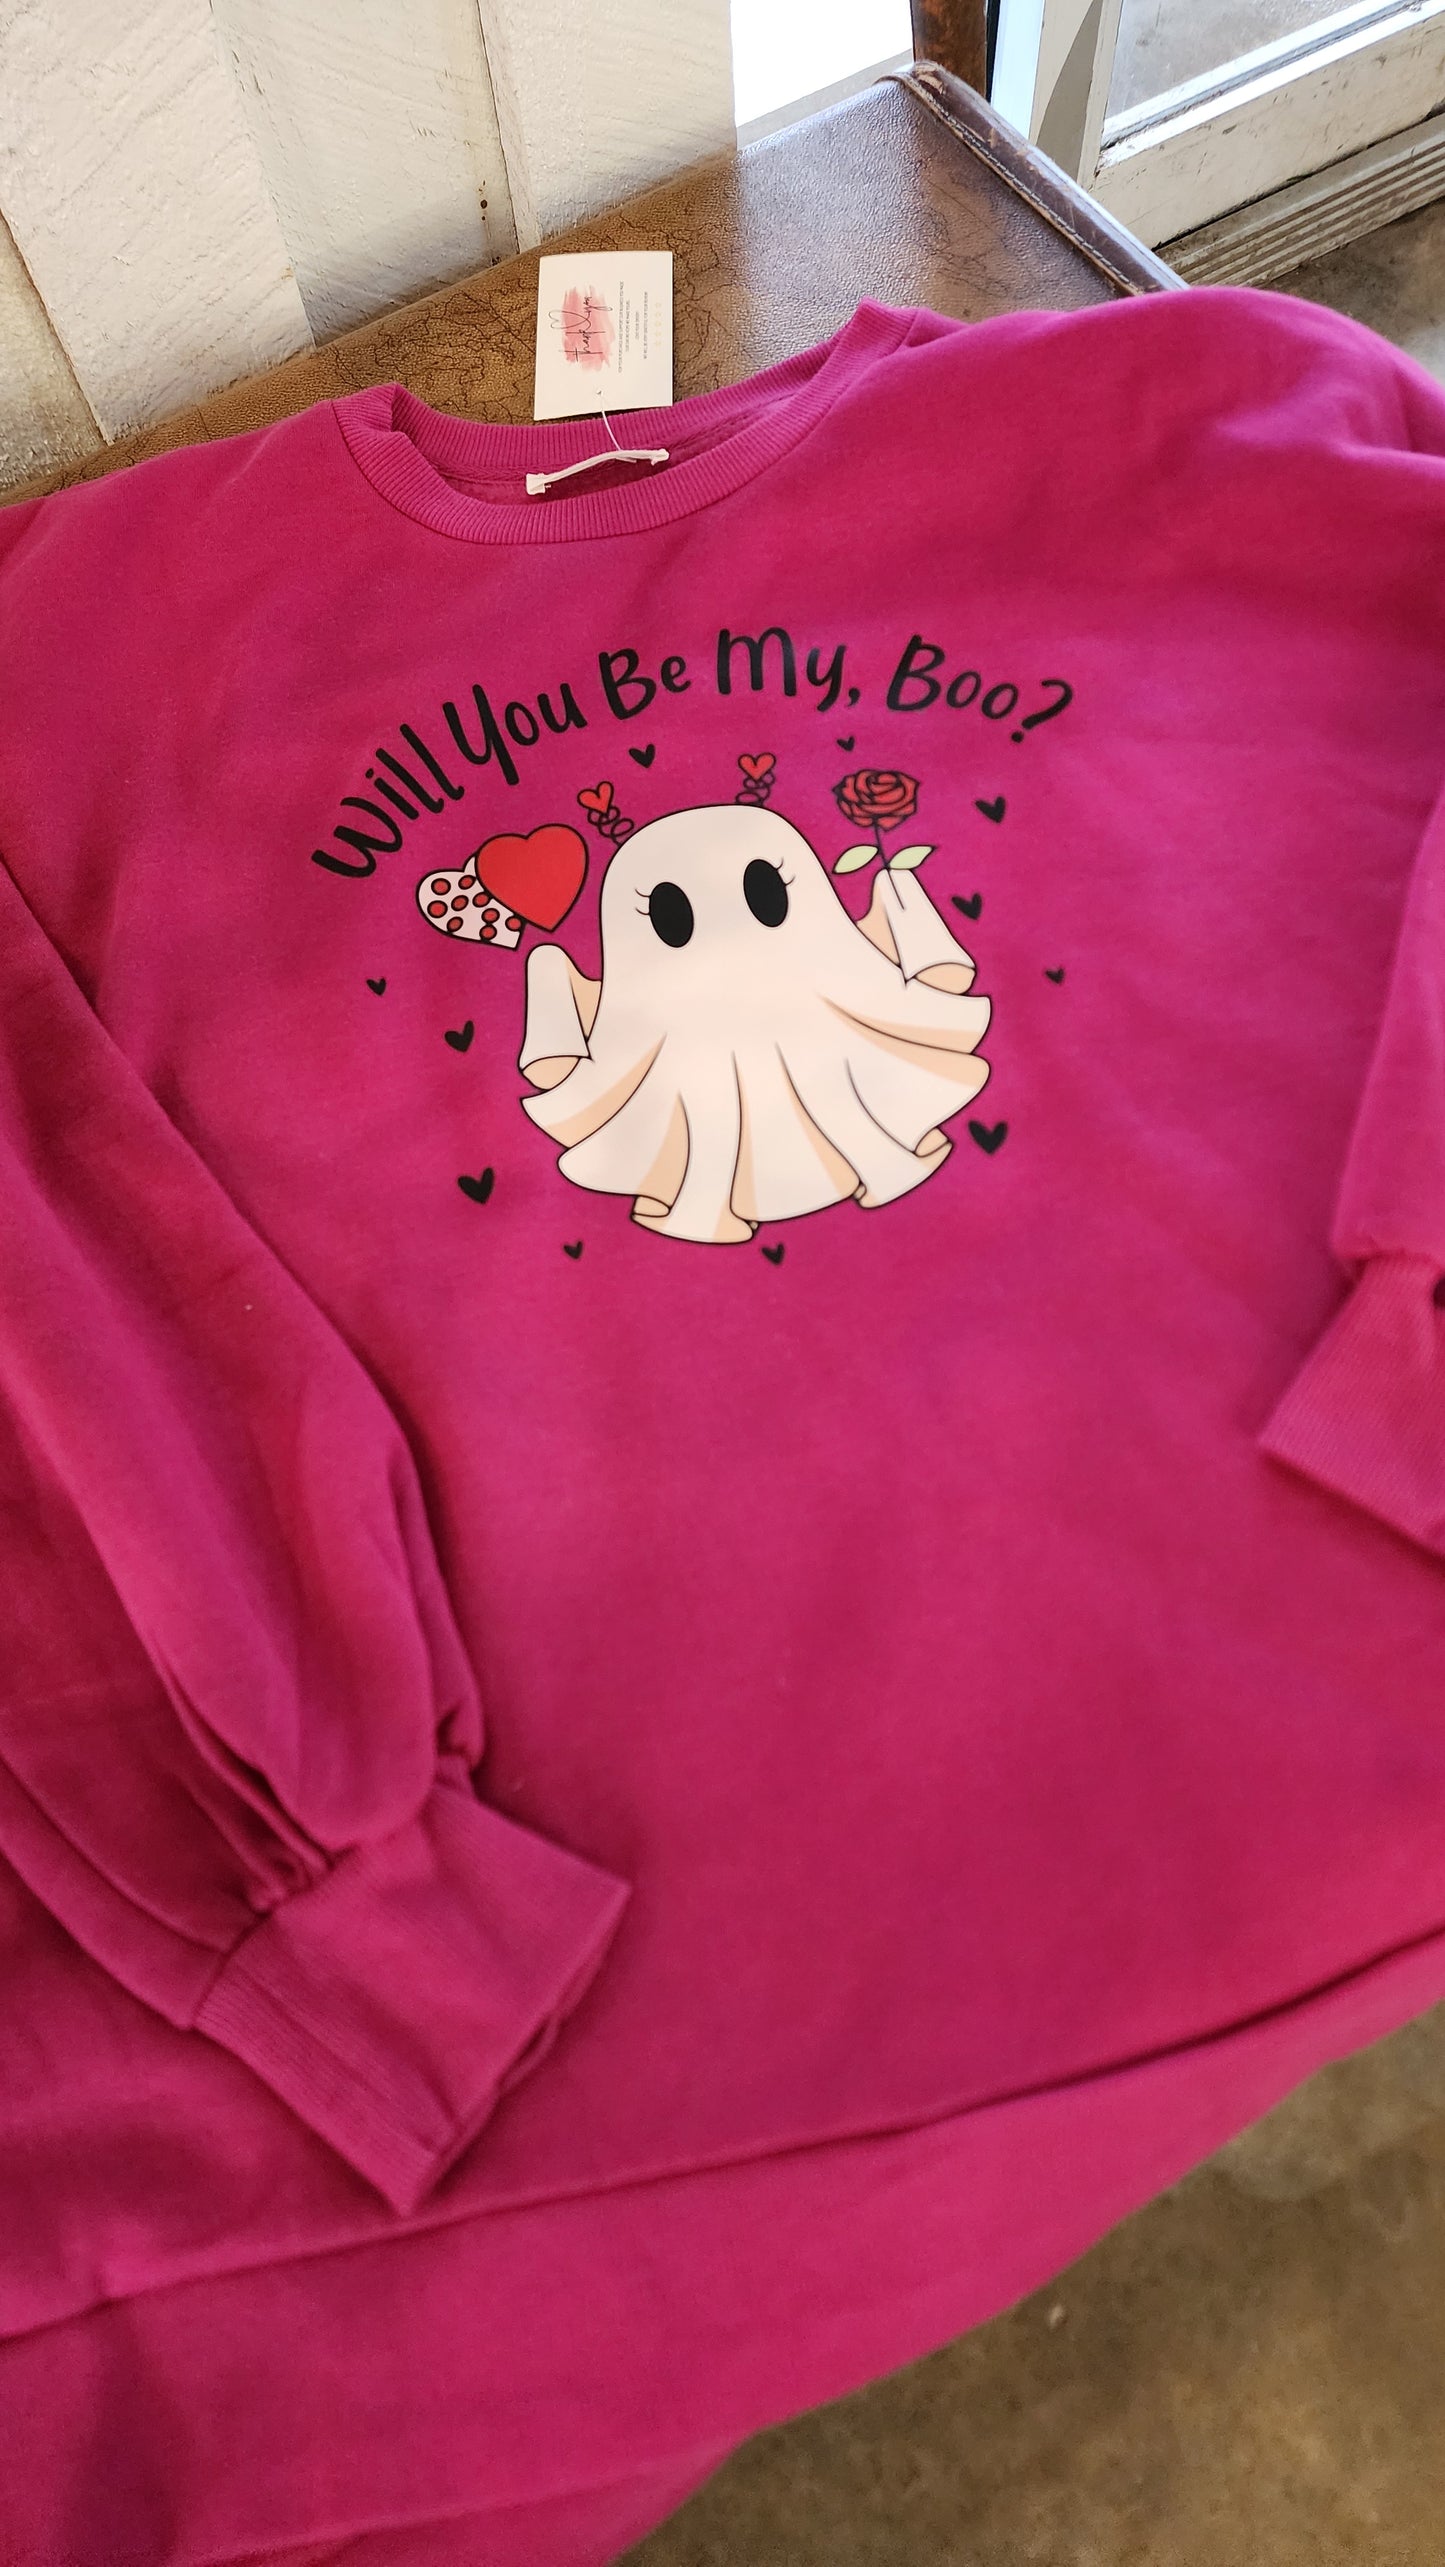 Will You Be My Boo? Hi-Low Sweatshirt With Pockets. Midnight Orchid Of Love